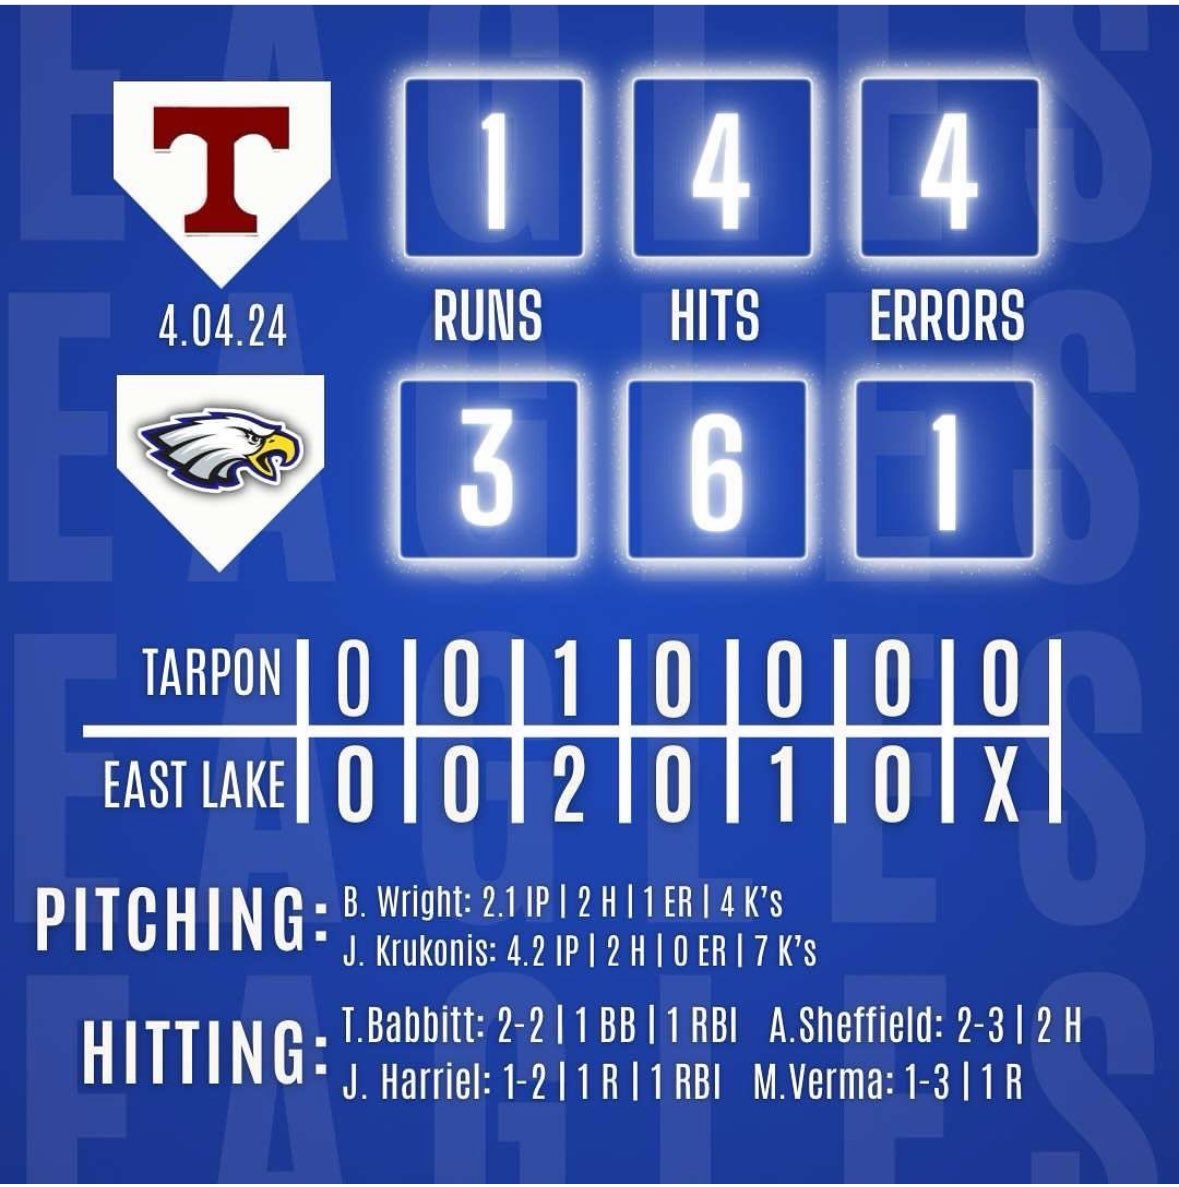 Finished up last week with a nice rivalry win at home. Great pitching for both teams! Was a great battle, good luck to the spongers the rest of the season! @jacksonk2024 4 2/3 2h 7k @bwrightFL2024 2 1/3 2h 4k @TreyBabbitt 2-2 RBI @AndrewSheff2 2-3 @jayden_harriel 1-2 2B RBI 🦅⚾️